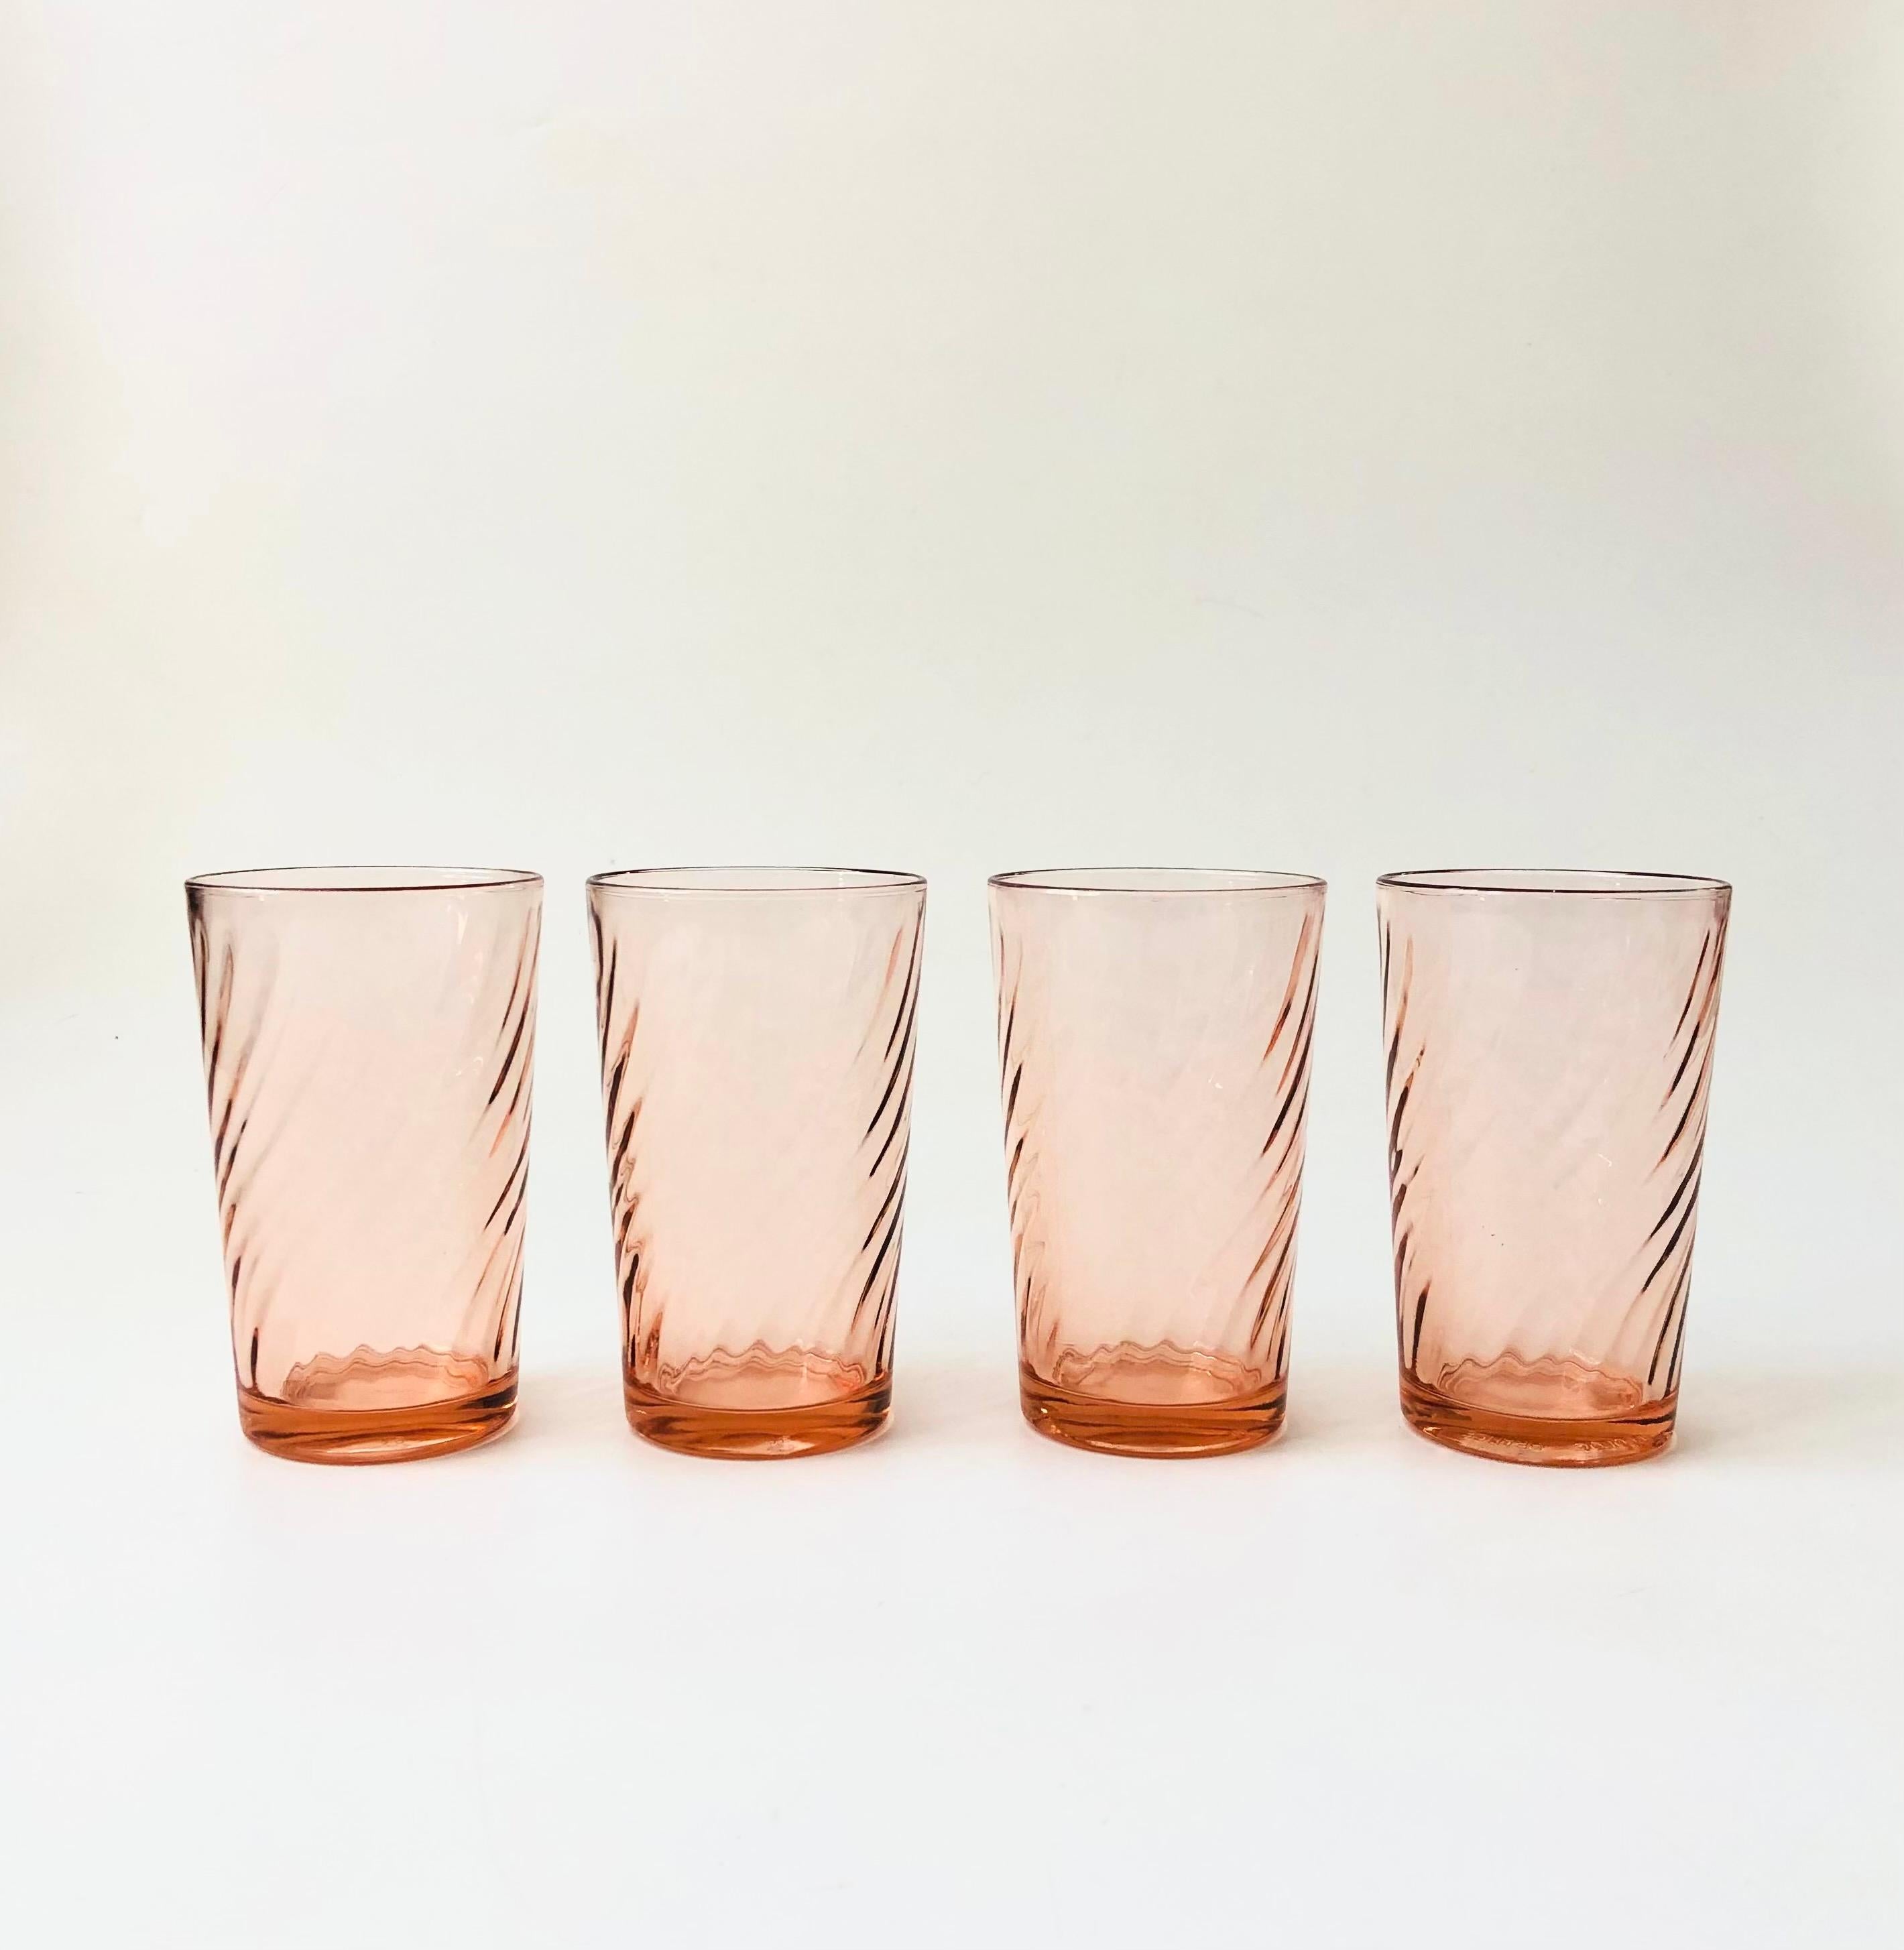 A set of 4 vintage tall glasses in a pale blush pink hue. Each glass has a lovely swirl design. Perfect for using as water glasses or for cocktails. Made in France by Arcoroc.

